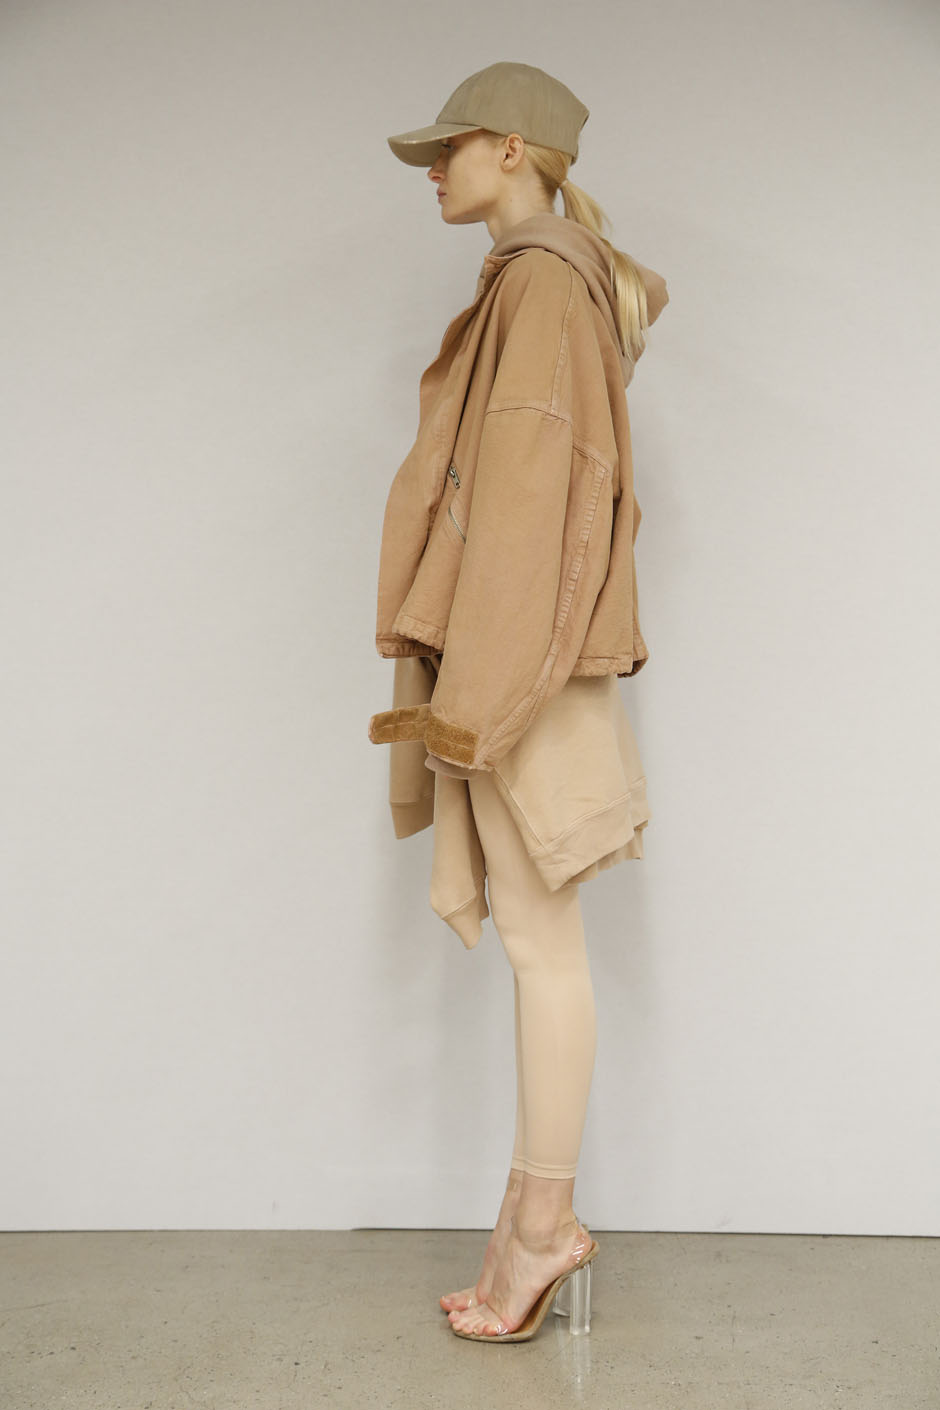 See Kanye West's Entire Yeezy Season 2 Collection Here